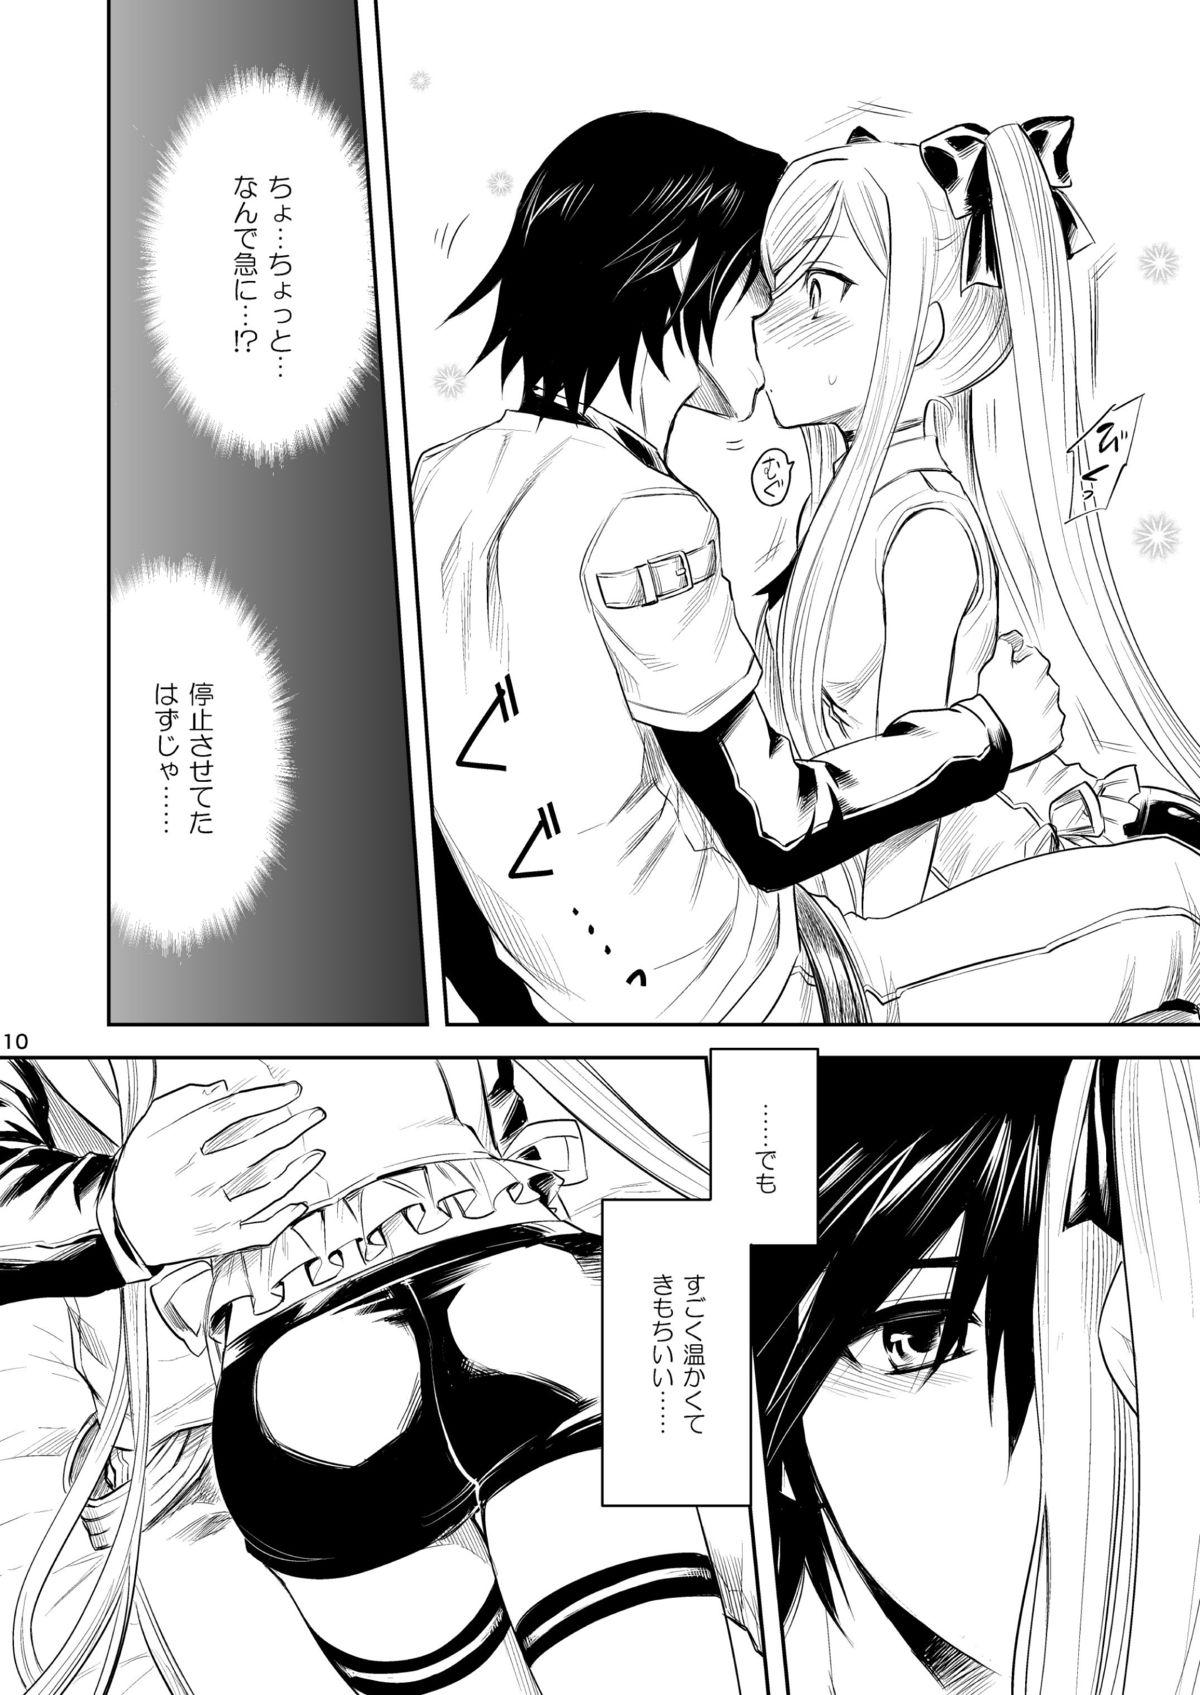 Penetration Now Updating! - Arpeggio of blue steel Filipina - Page 9